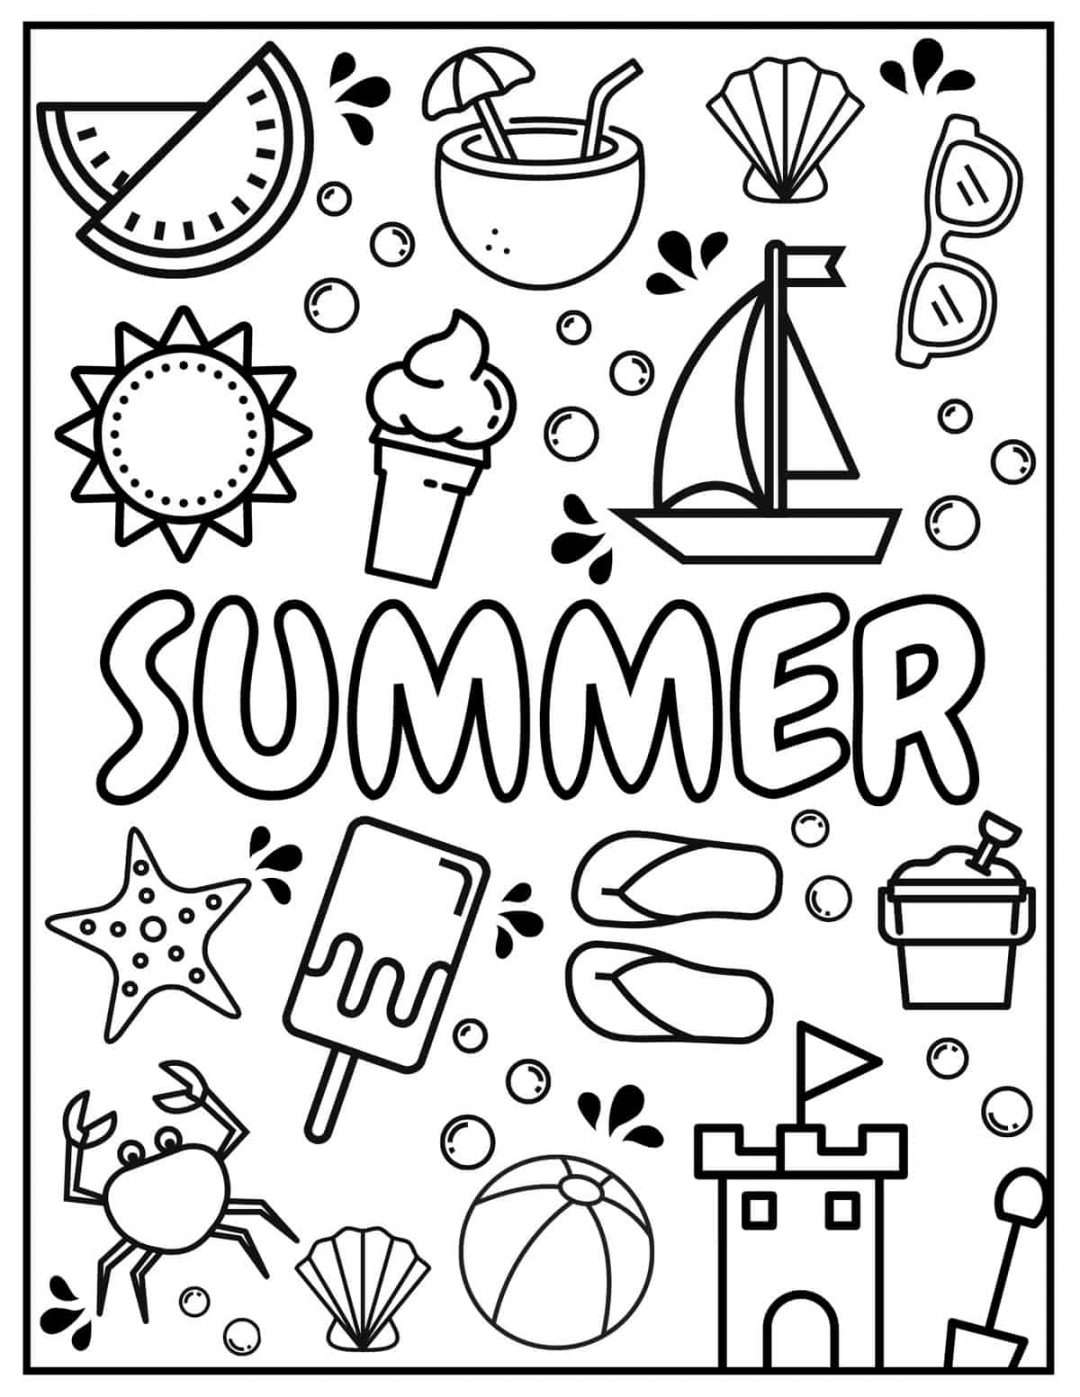 Summer Coloring Pages Free Printable - Printable -  Free Summer Coloring Pages for Kids - Prudent Penny Pincher